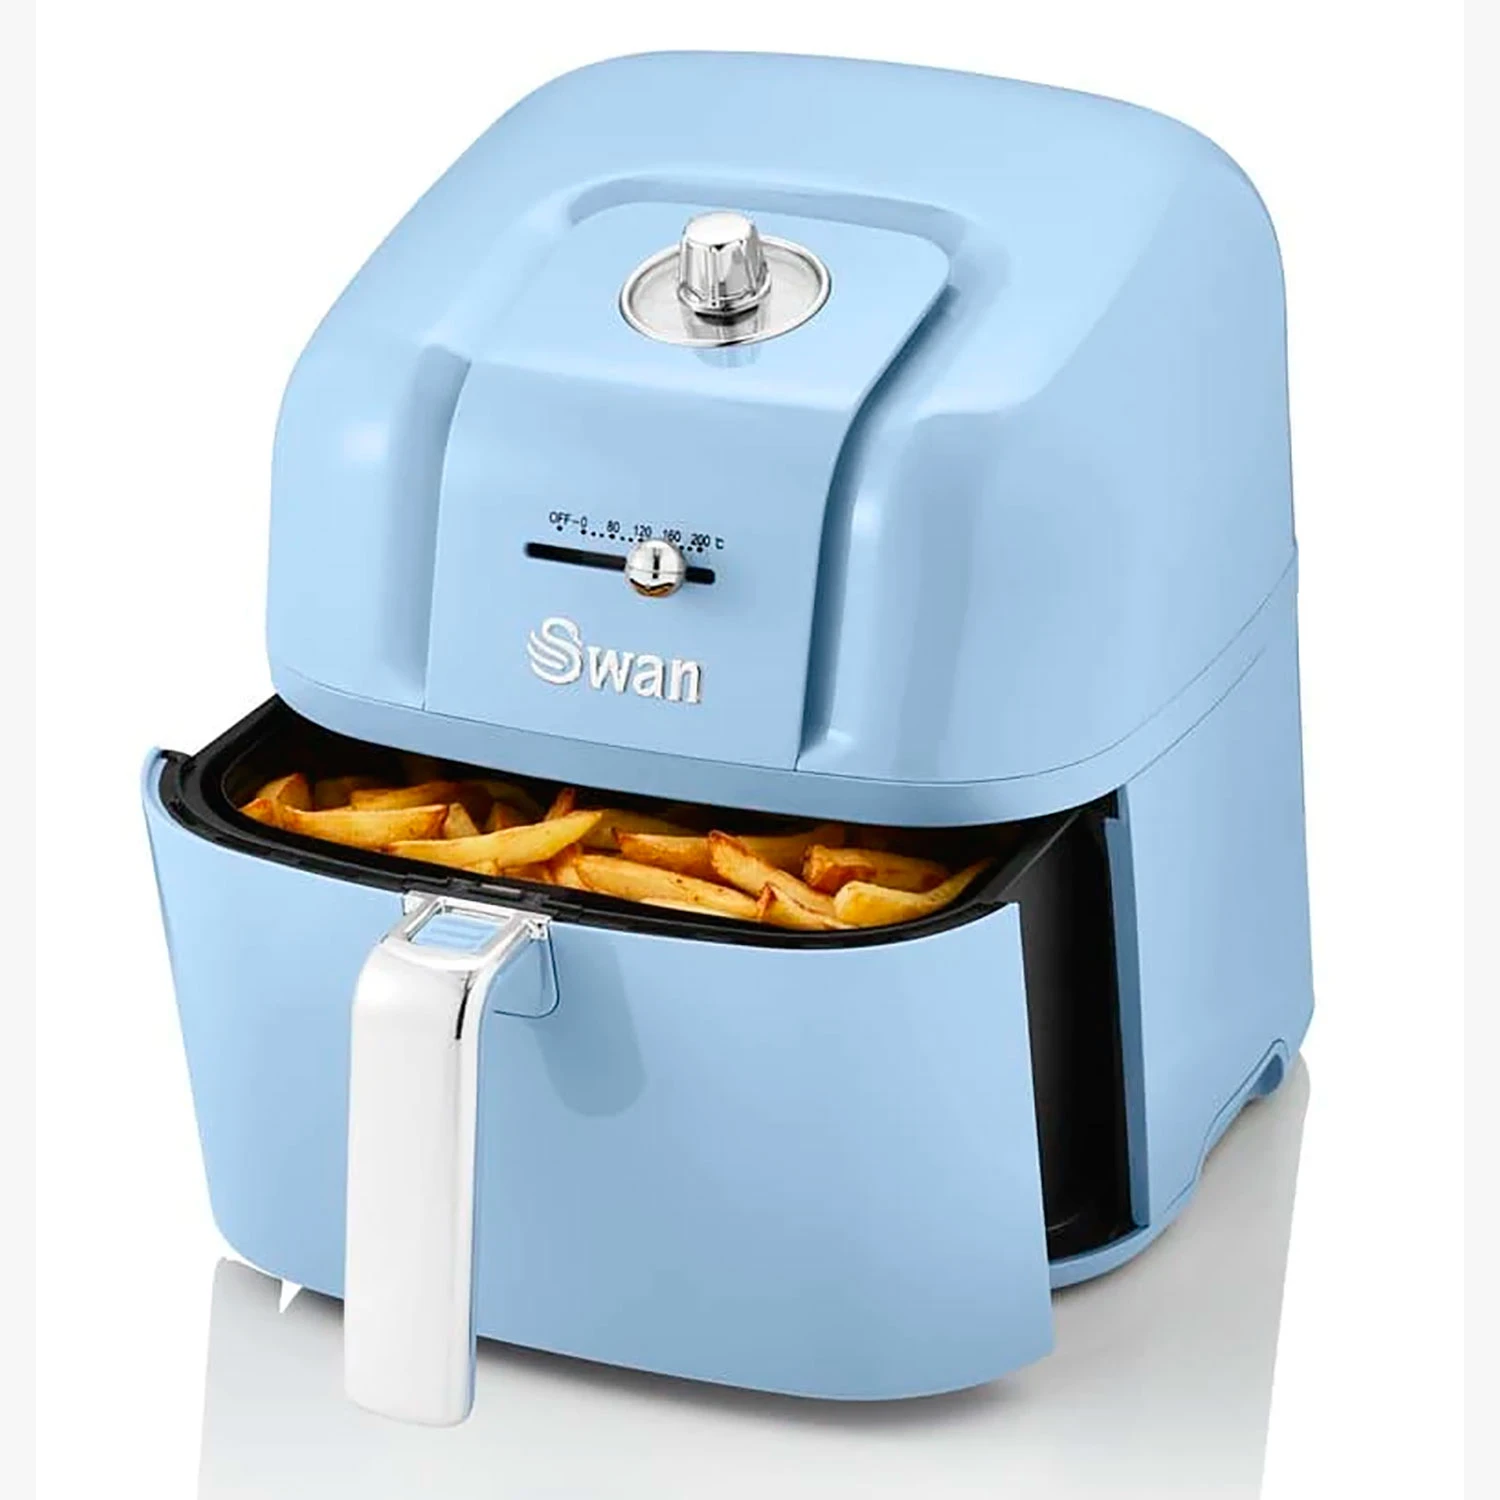 https://ae01.alicdn.com/kf/Sdad0b411ca3d4bc6a1bbc79ff25ea83dB/SWAN-SD10510BLN-hot-air-oil-free-fryer-6-liters-thermostat-timer-compact-non-stick-blue-1500W.jpg